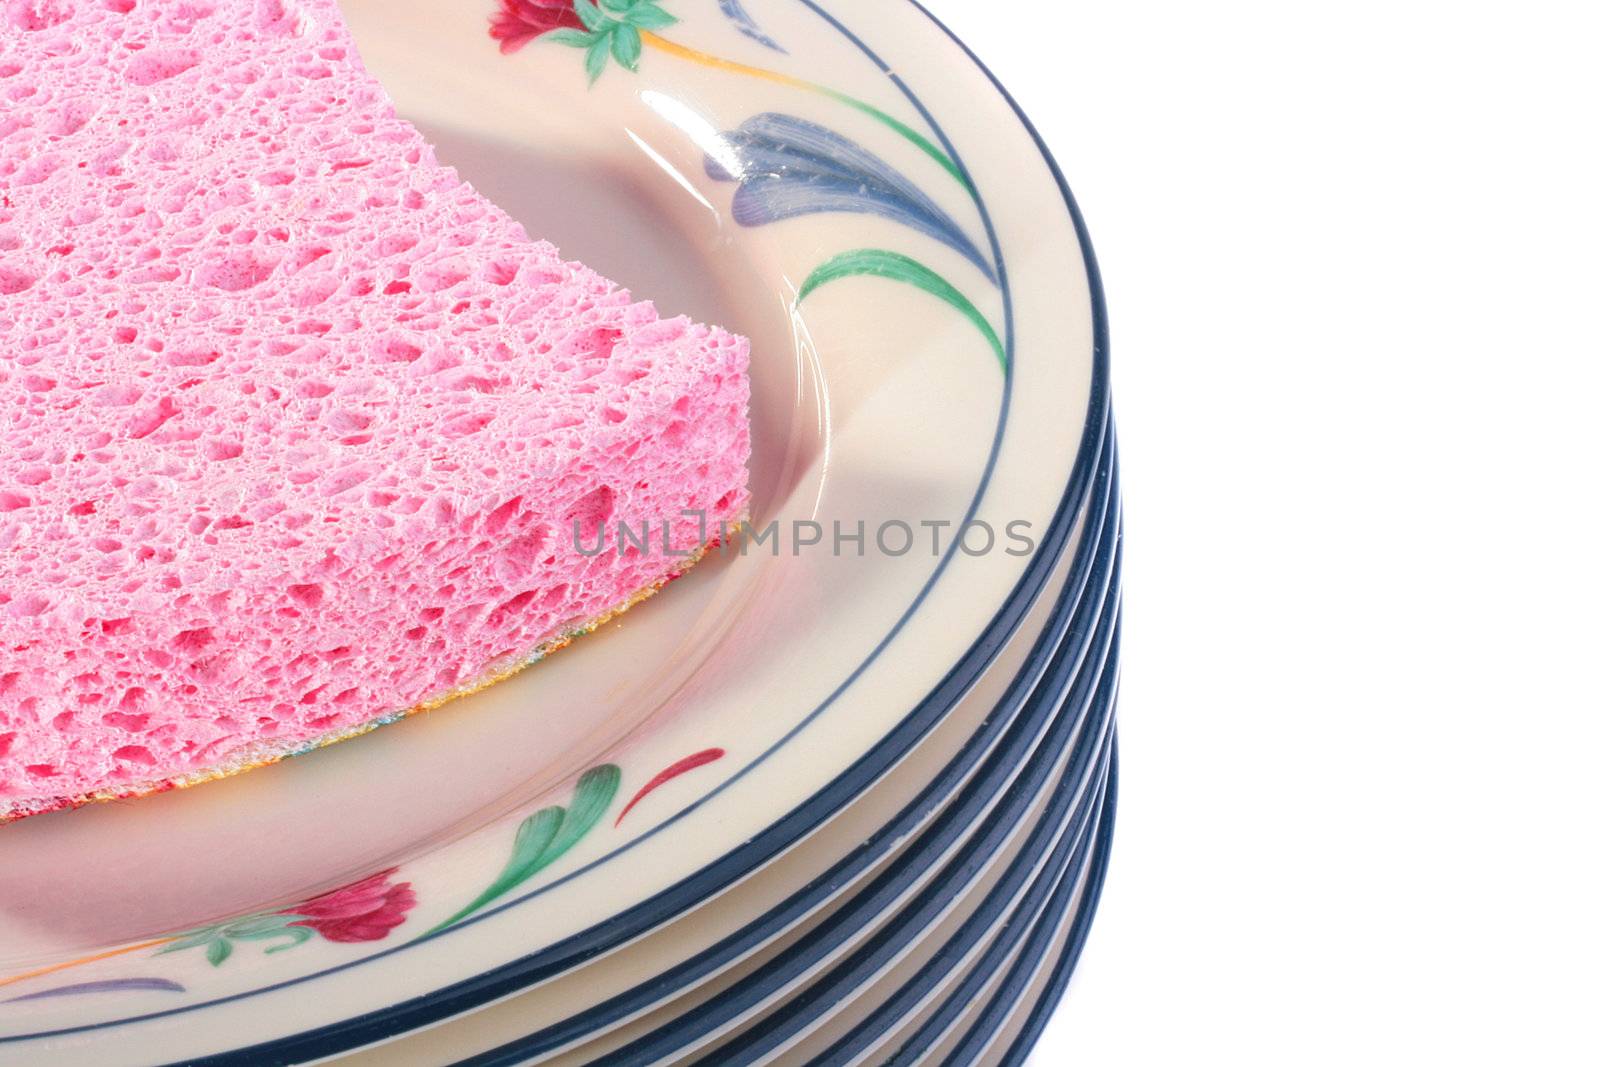 Pink bast for ware washing on a pile of pure plates.